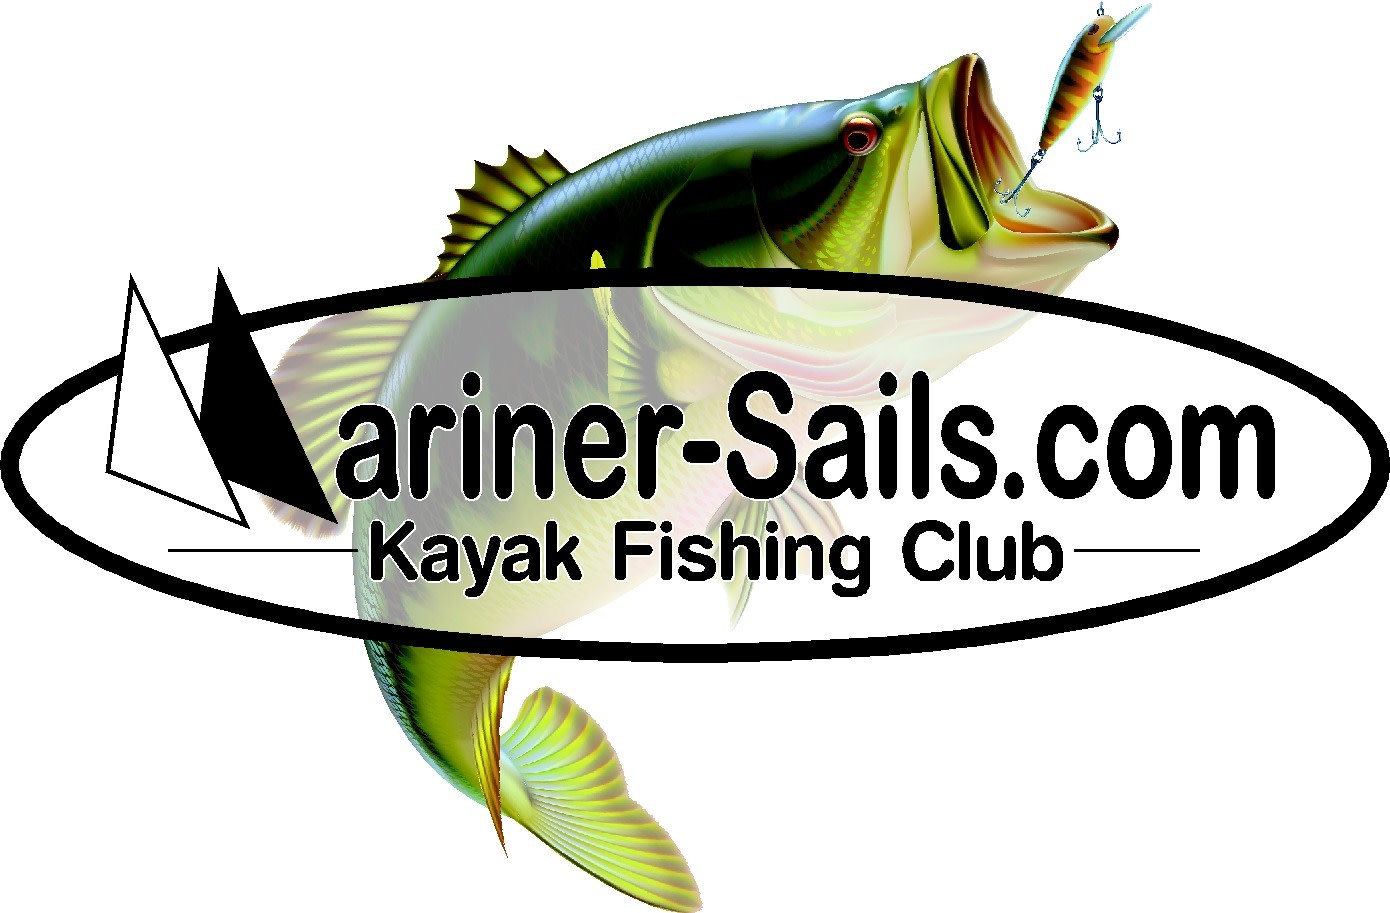 Heroes On The Water Mariner Sails Kayak Fishing Cl 